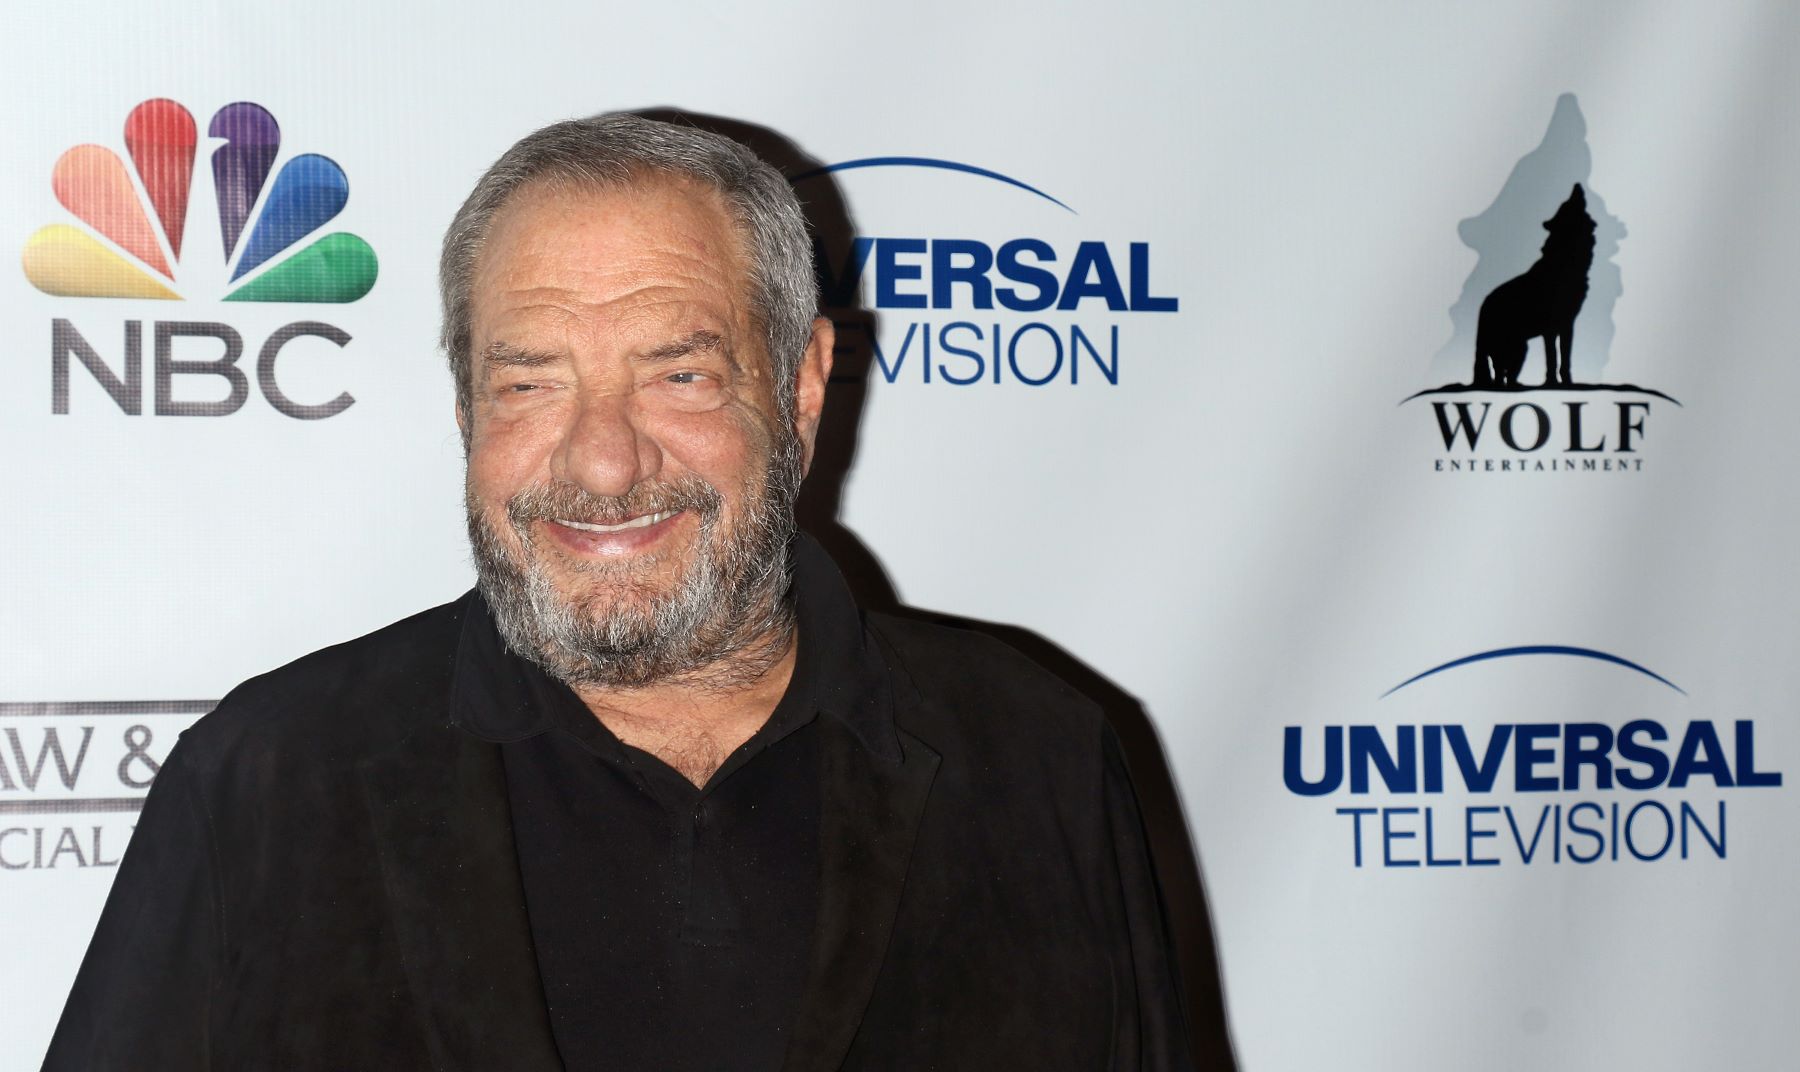 Chicago P.D. producer Dick Wolf